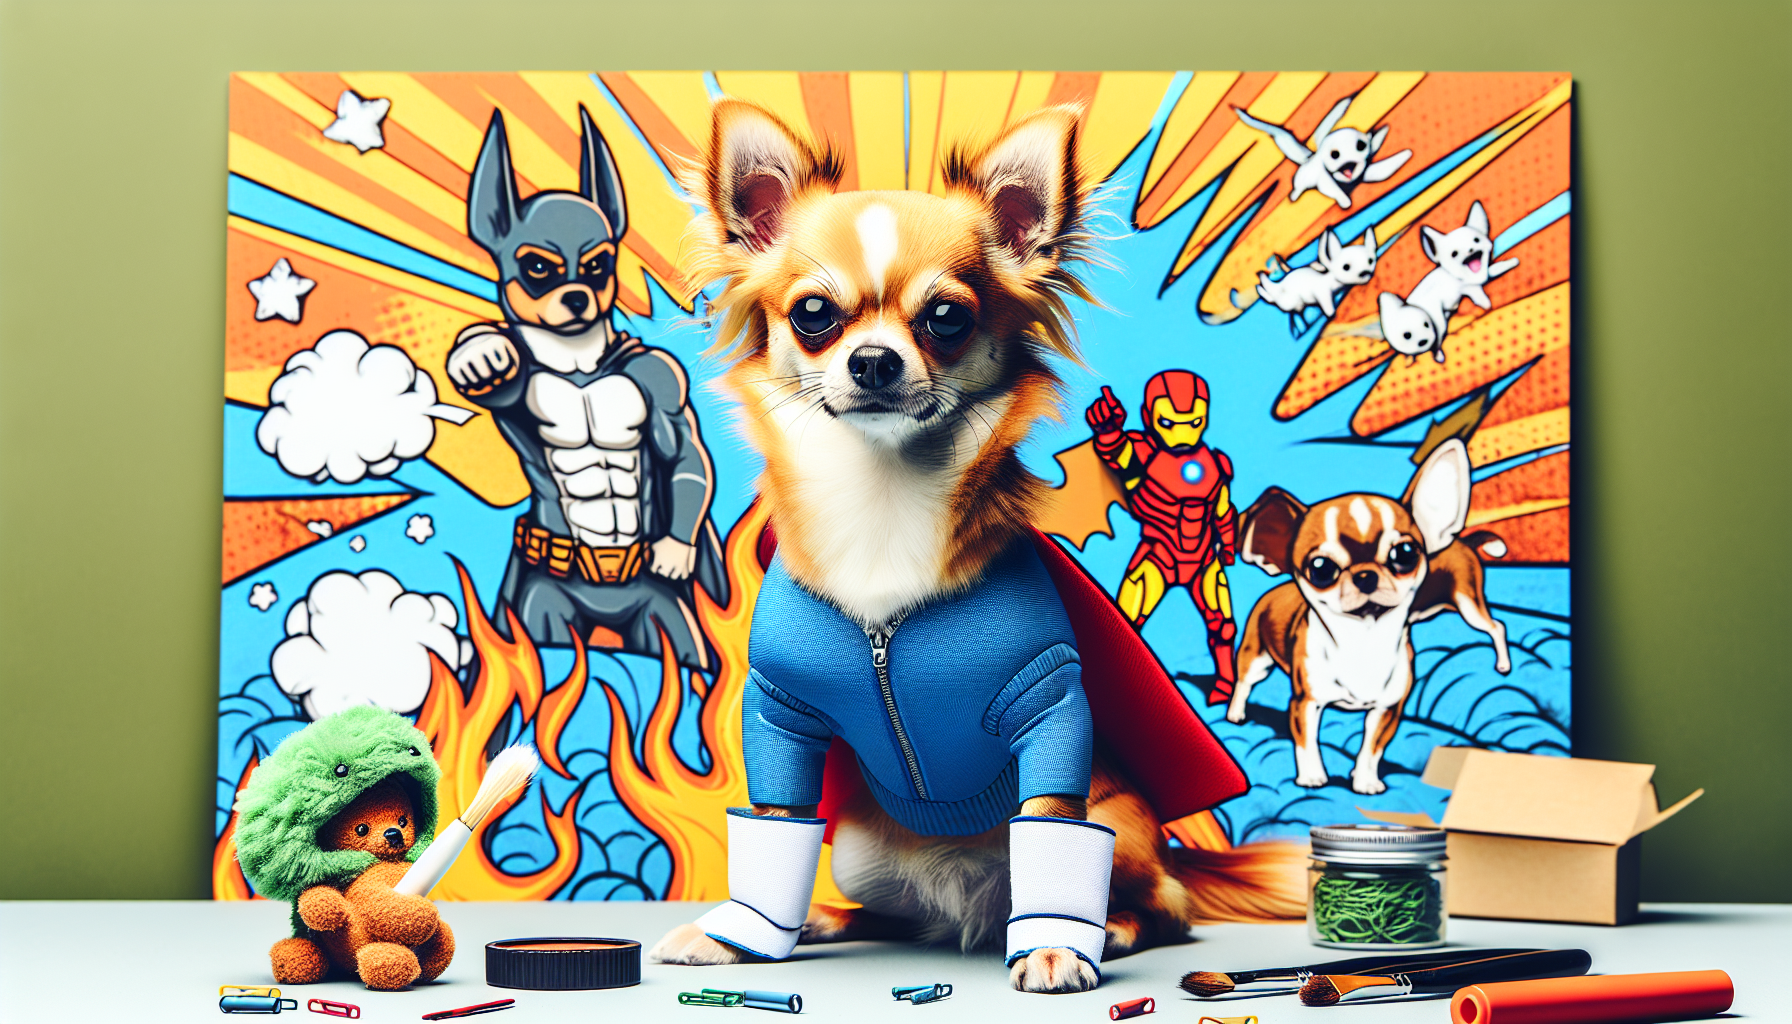 Chihuahua in superhero costume with comic book backdrop.